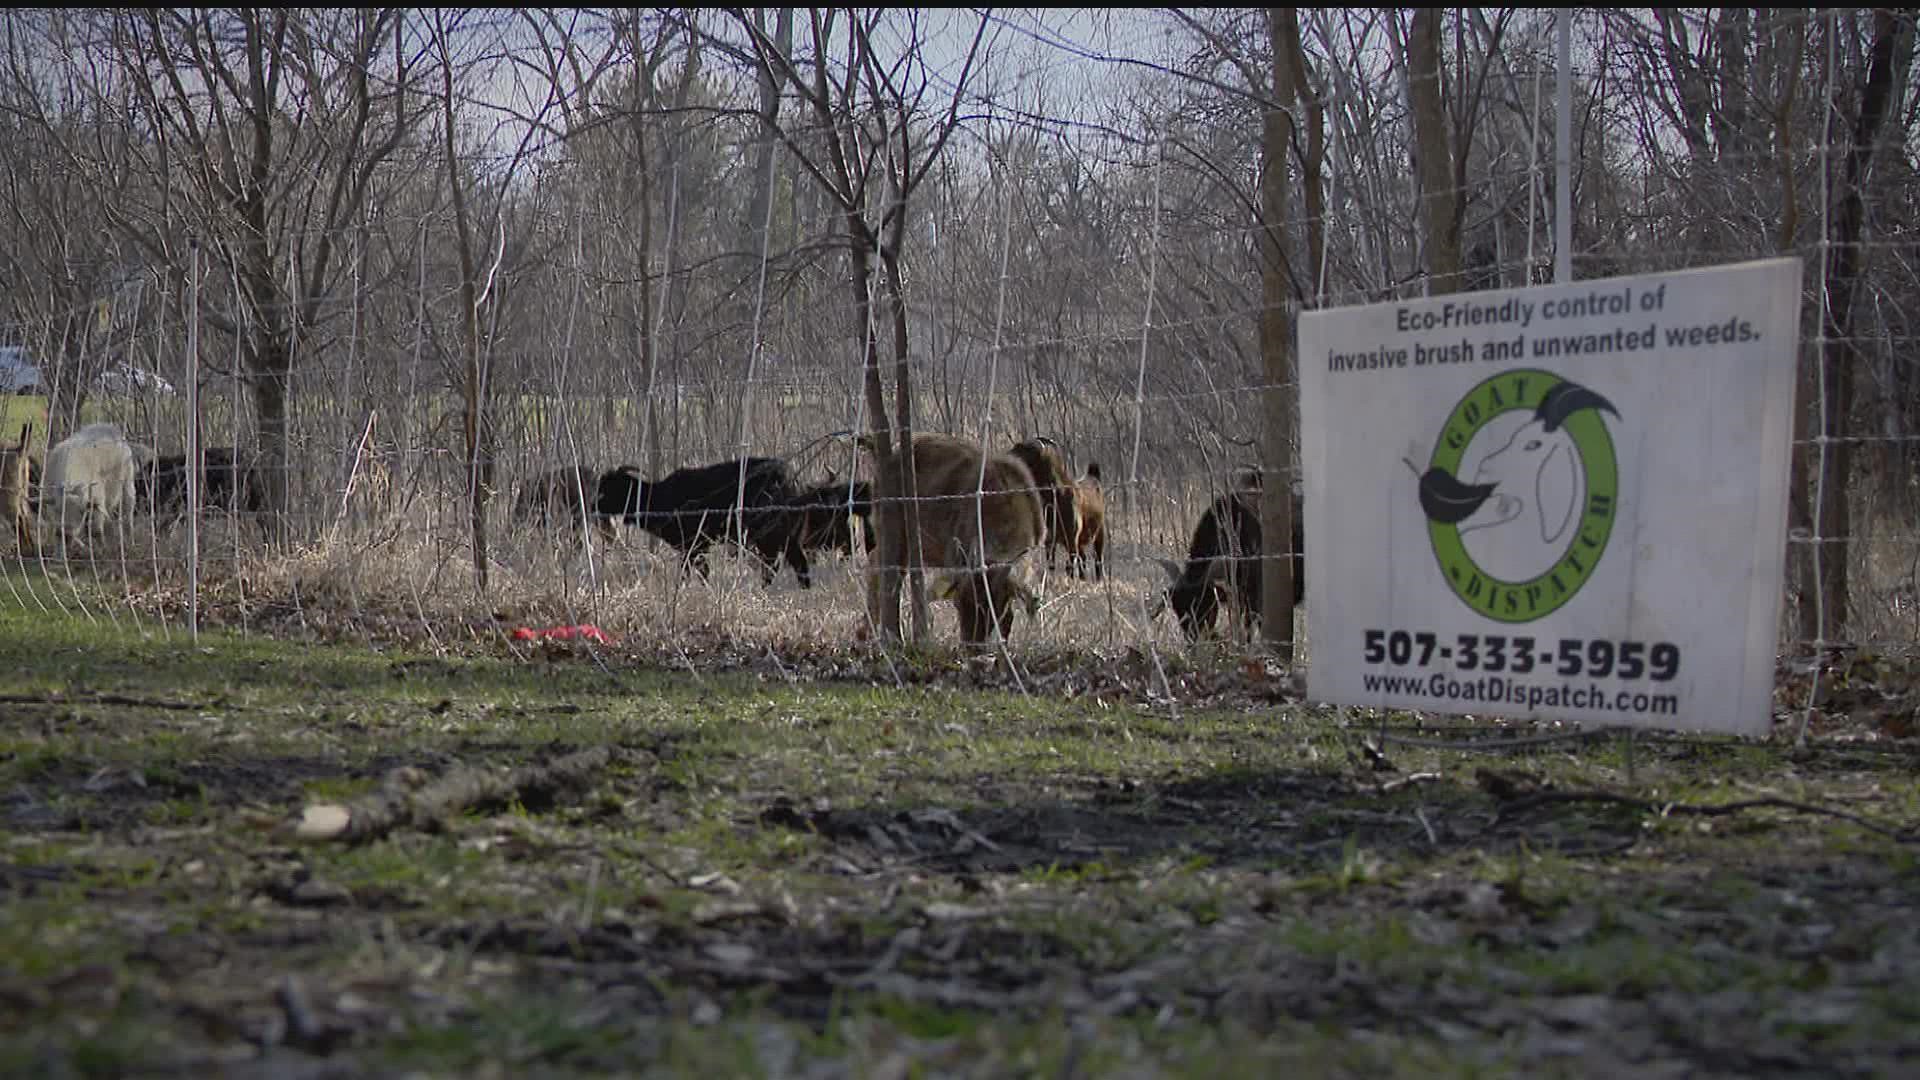 The MN Department of Agriculture granted the city $5,000 to bring in a herd of goats, aiming to deal with its buckthorn problem in an eco-friendly way.